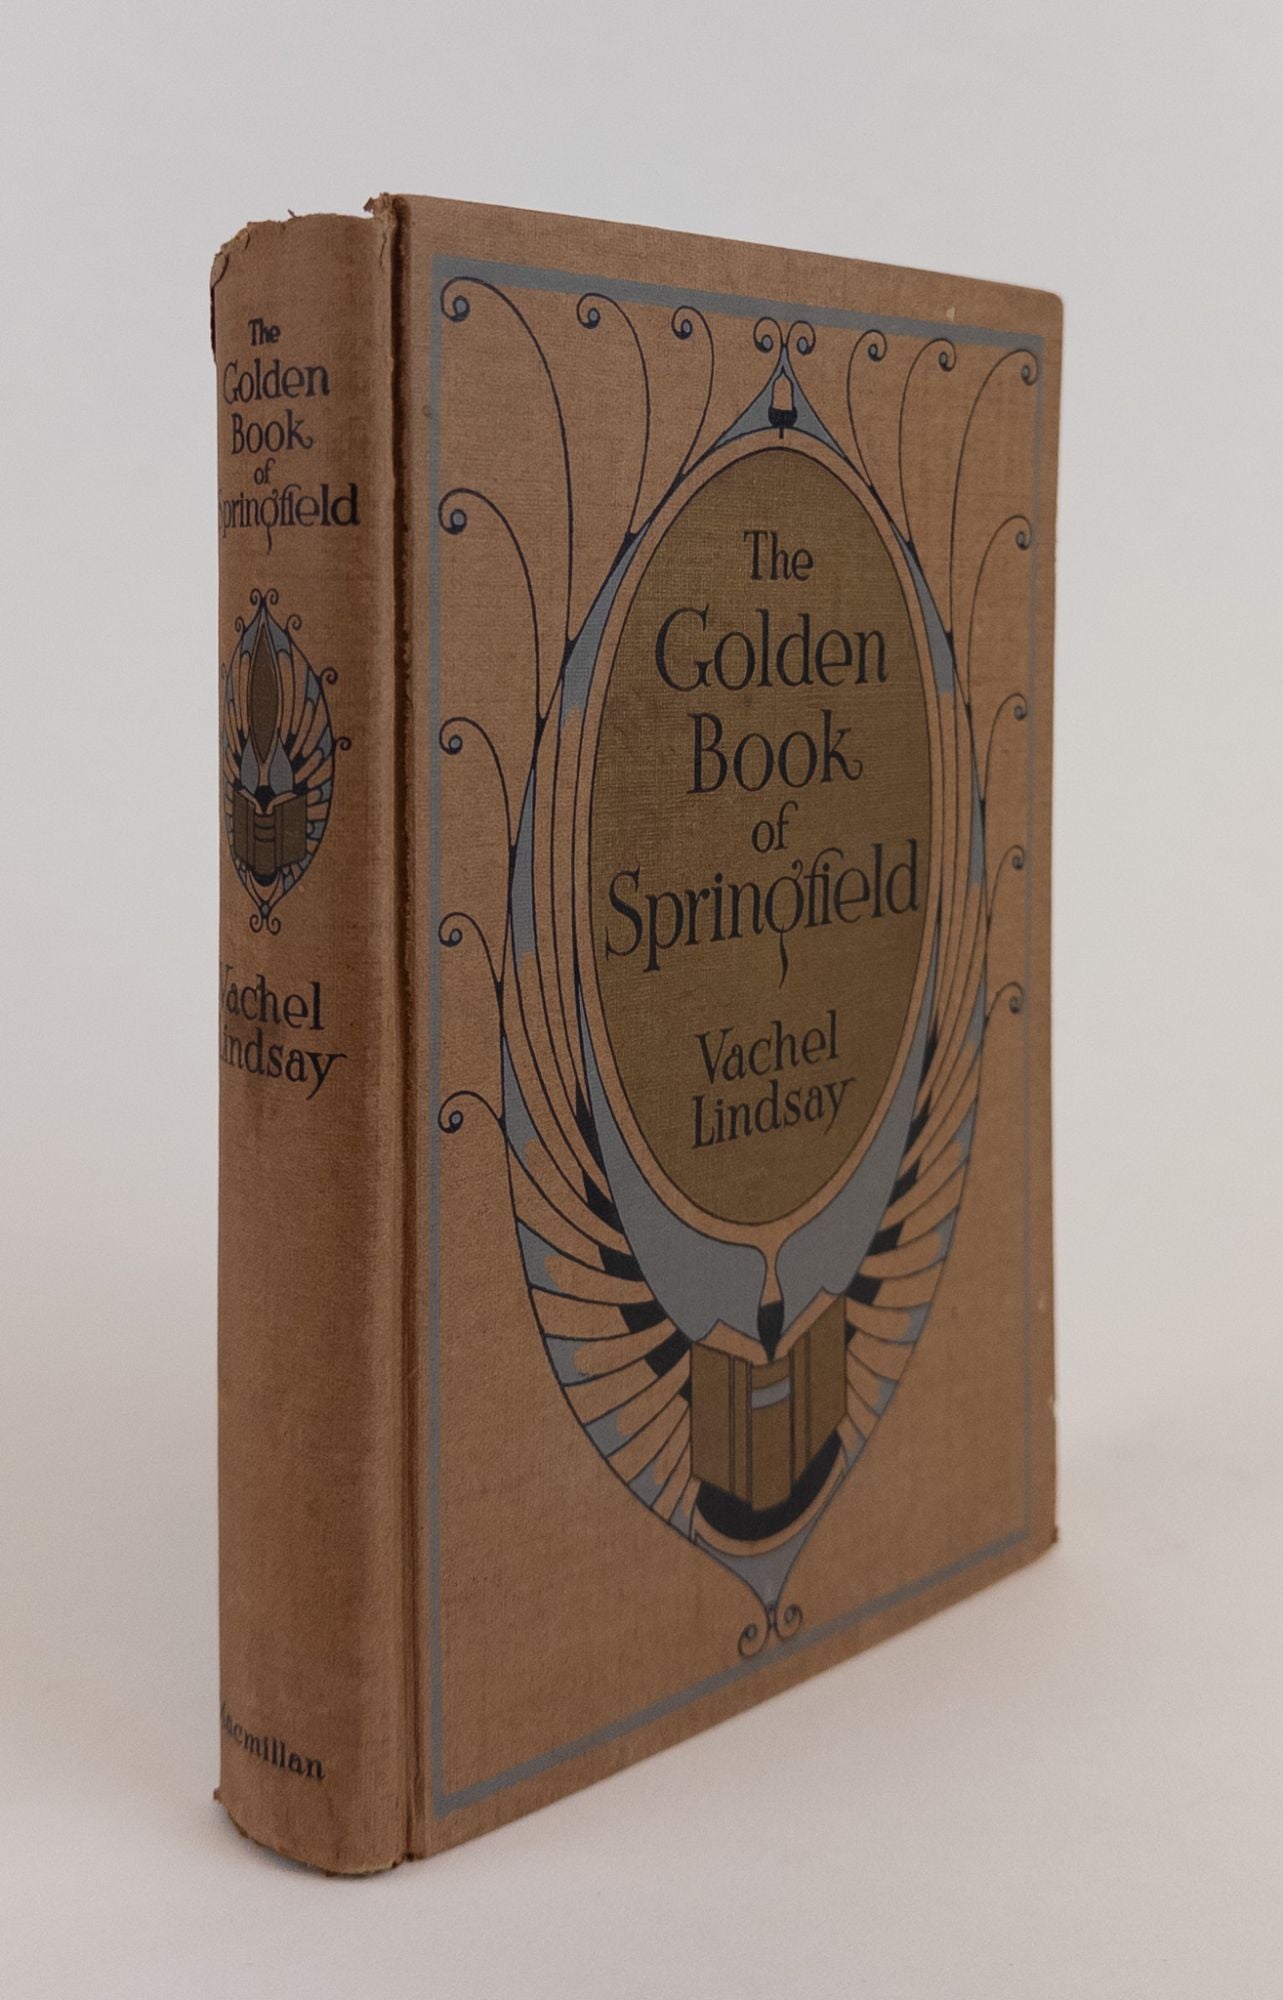 Product Image for THE GOLDEN BOOK OF SPRINGFIELD [Signed]